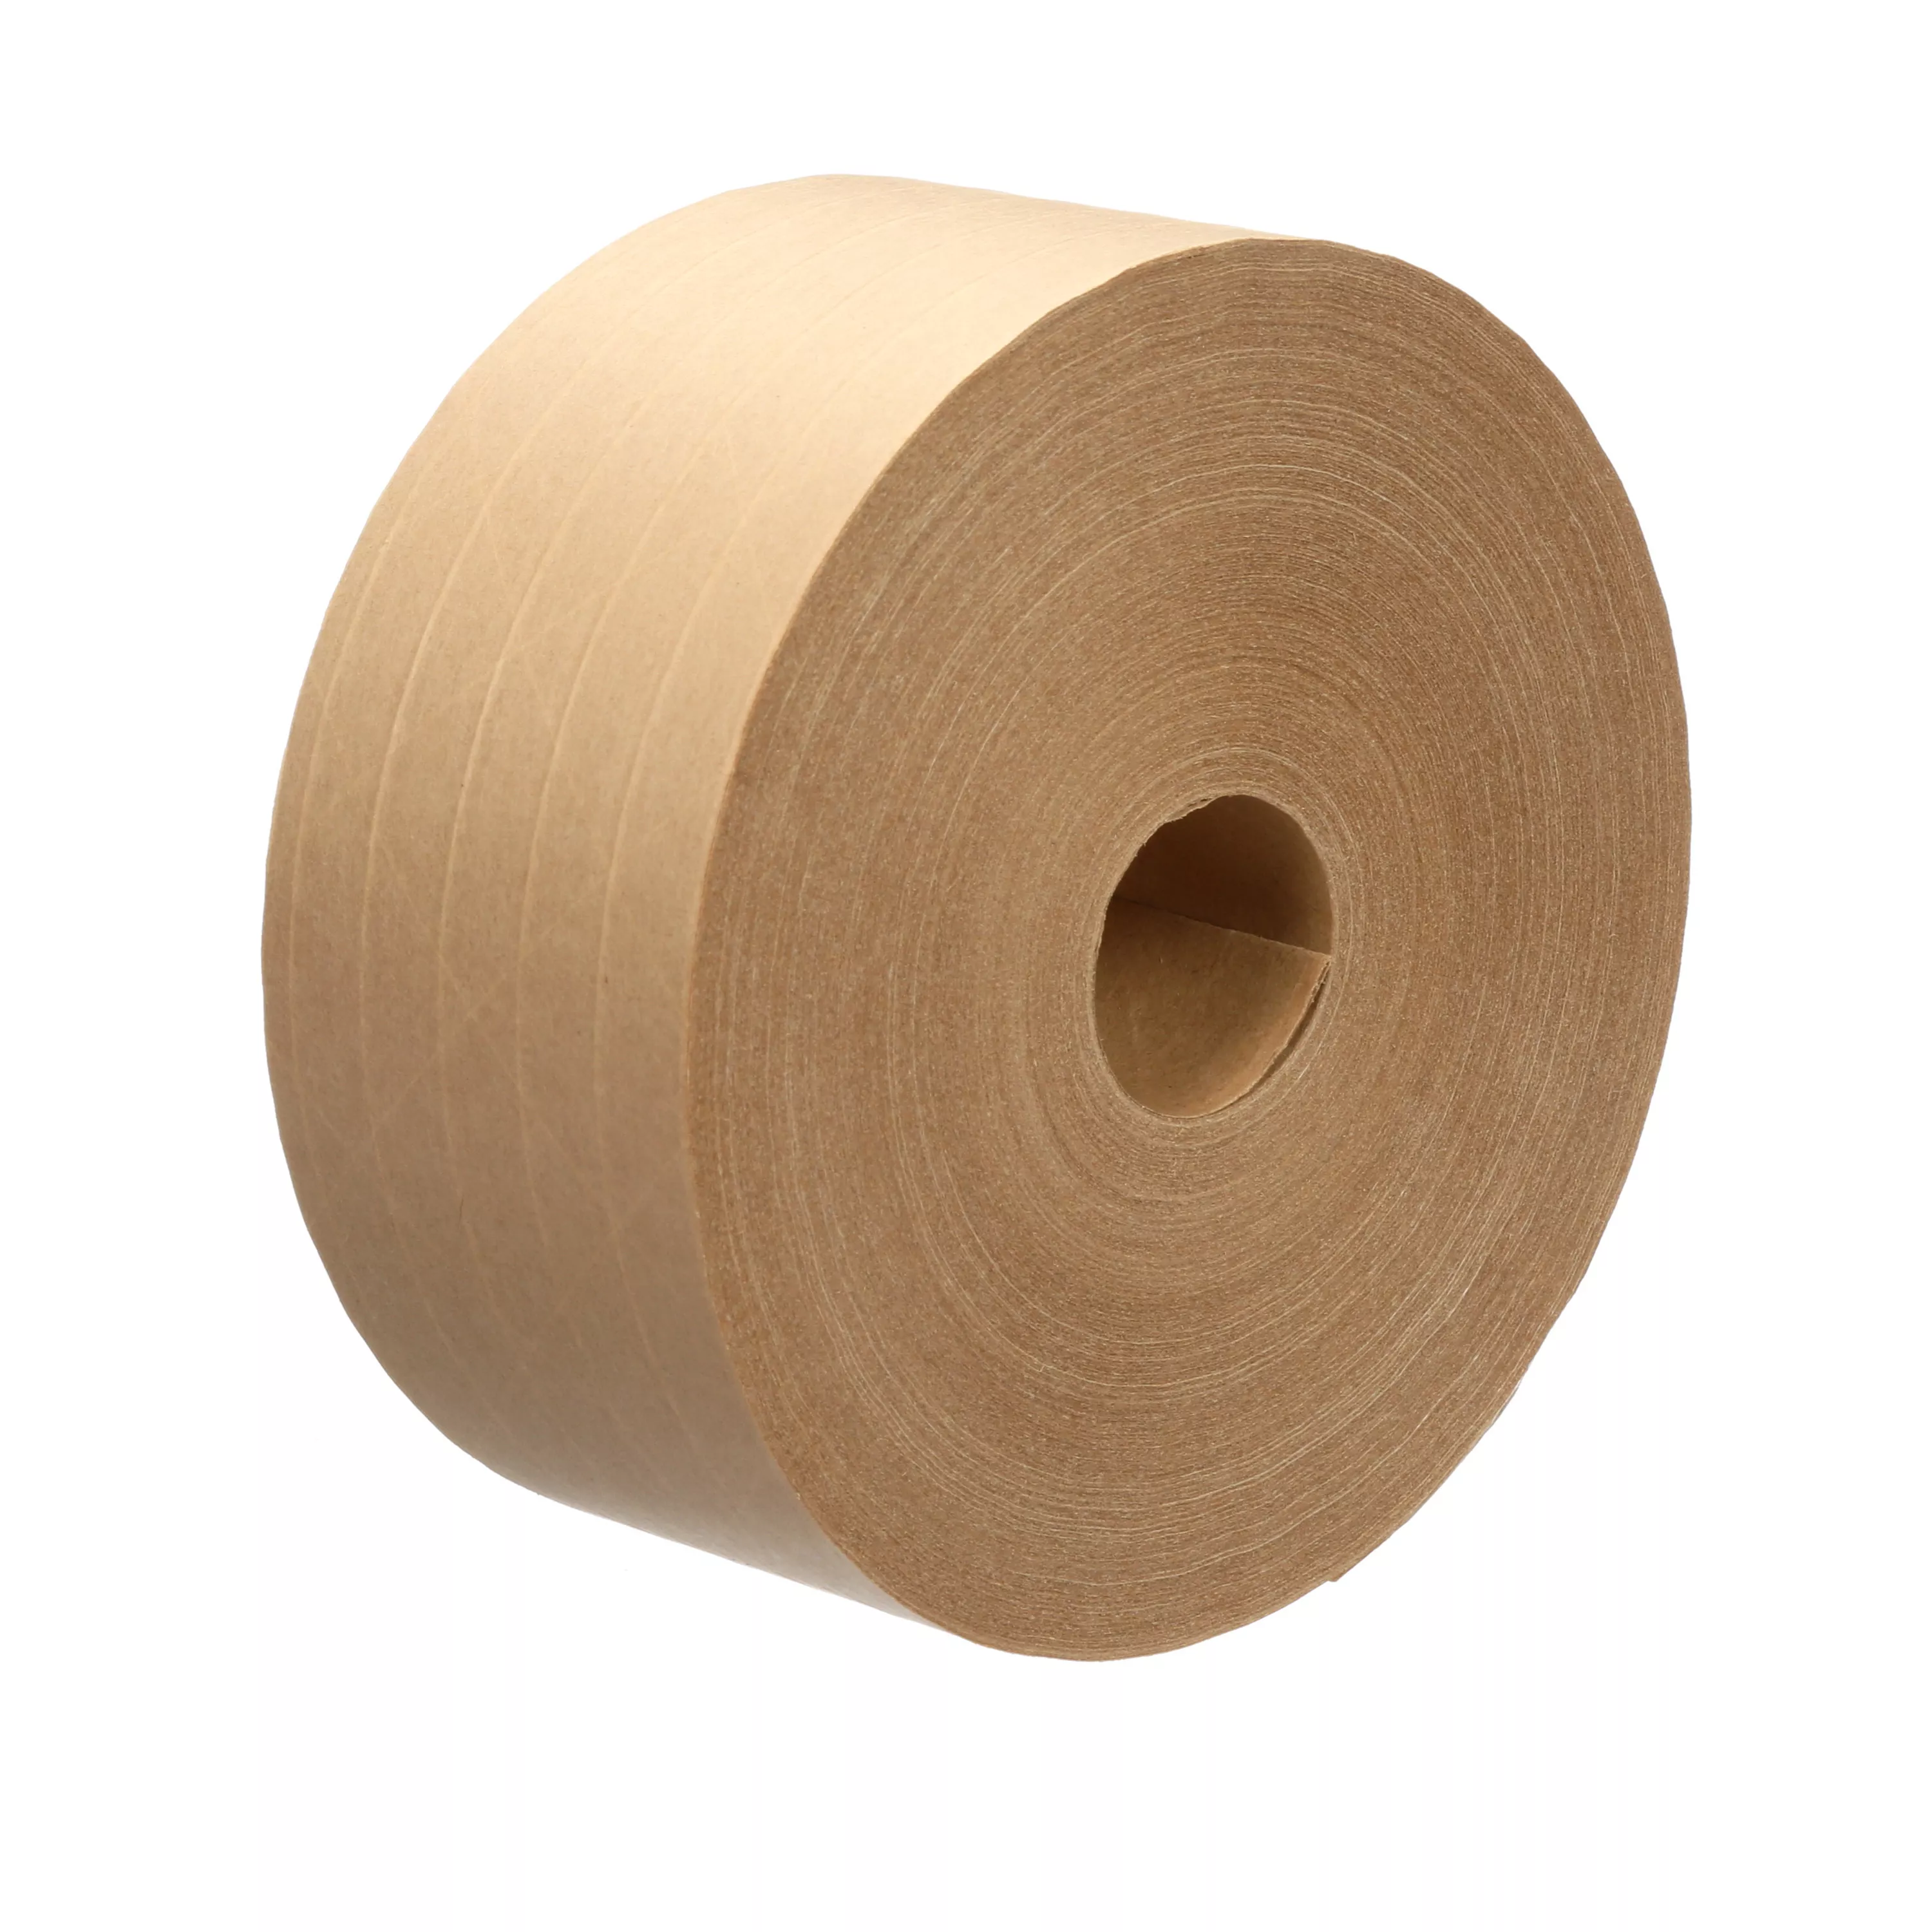 SKU 7010335896 | 3M™ Water Activated Paper Tape 6145